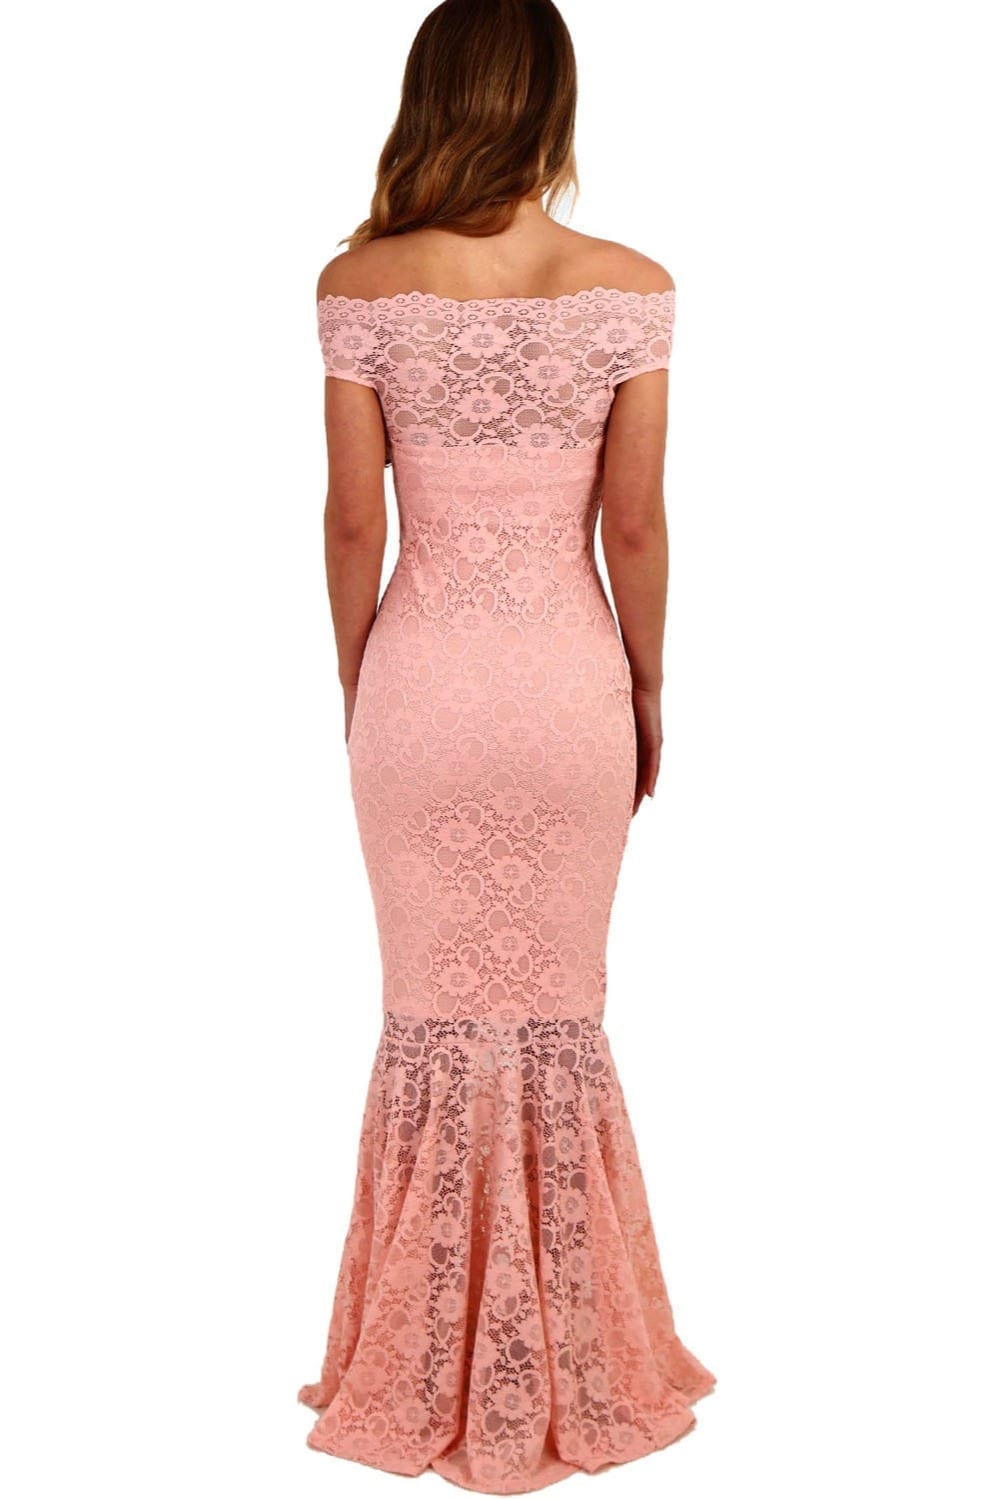 Pink Lace Off Shoulder Hollow Out Maxi Dress